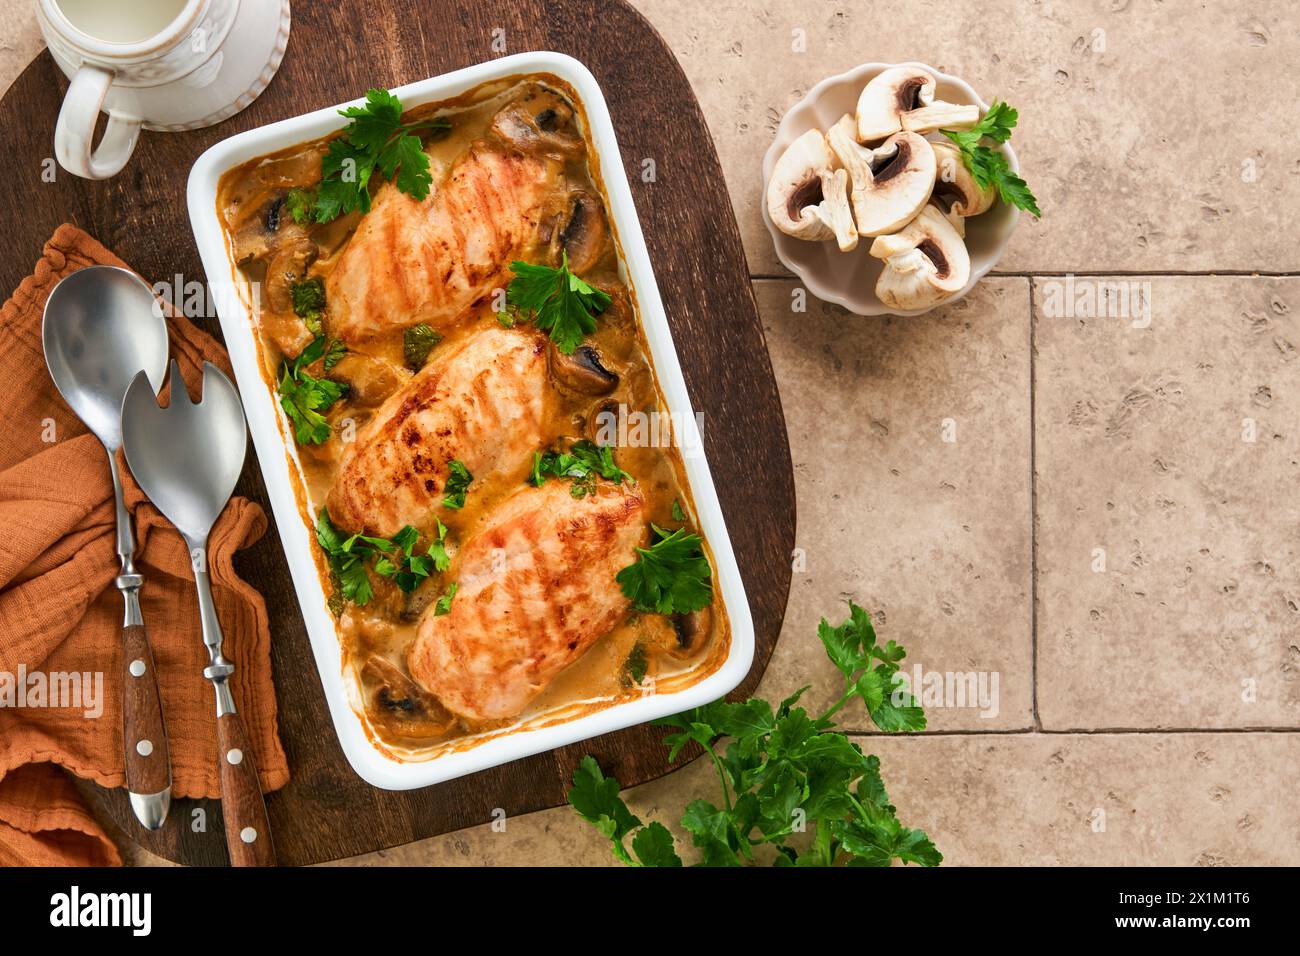 Baked chicken breast bbq with mushrooms and garlic in cream sauce on old brown concrete tilestable backgrounds. Top view image with ingredients for co Stock Photo